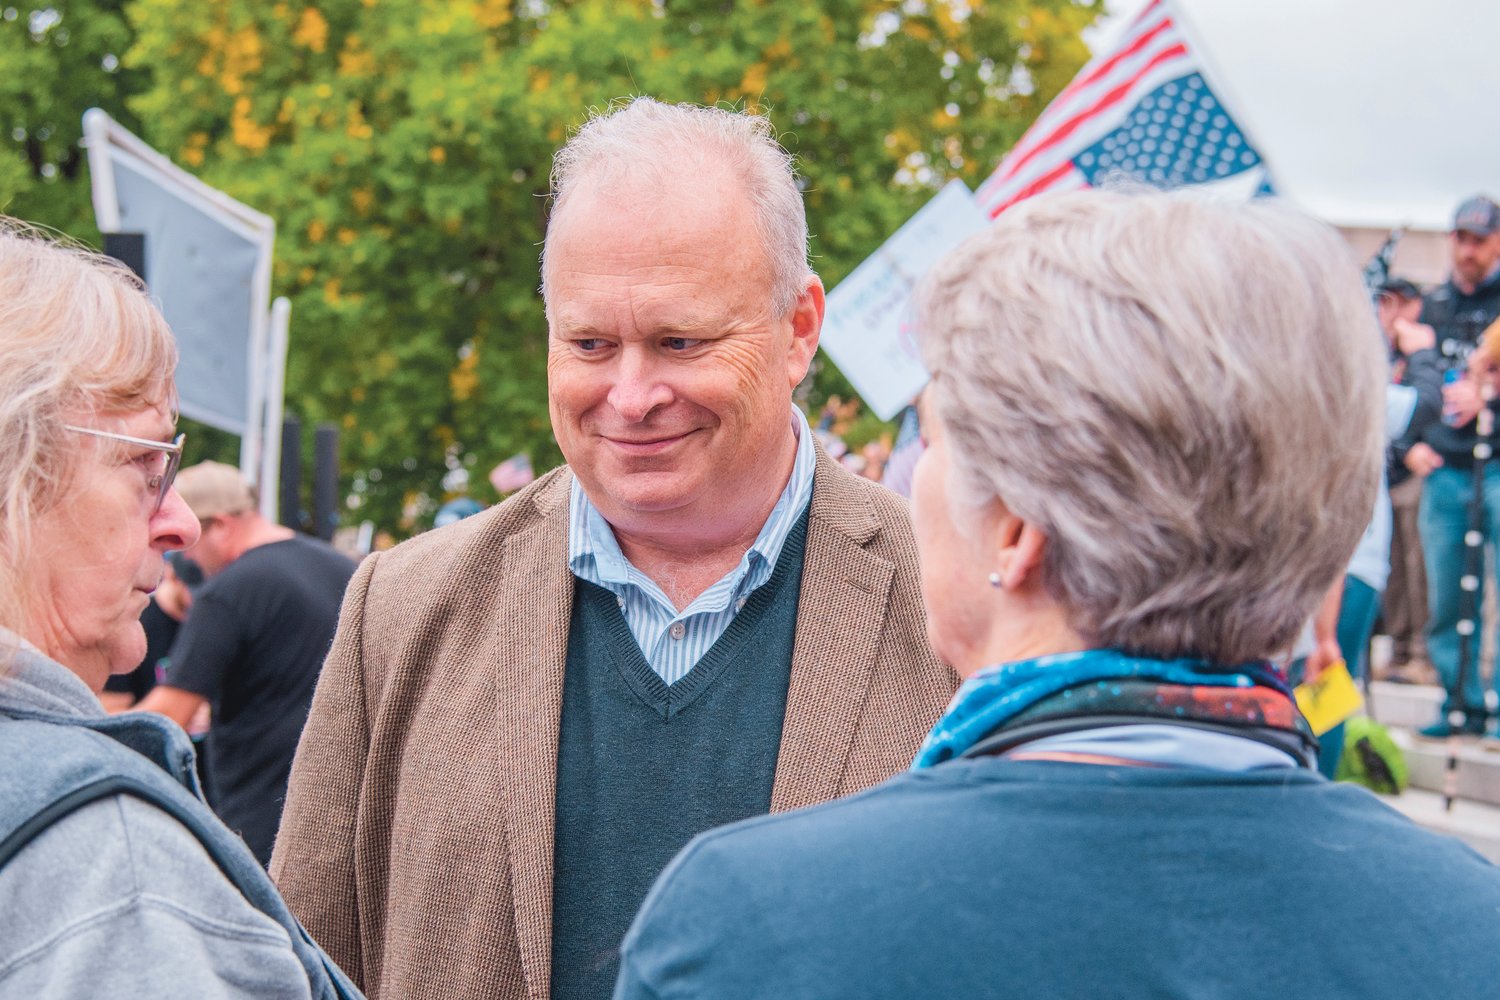 FILE PHOTO — Representative Jim Walsh smiles while mingling with attendees of a “Medical Freedom Rally” outside the Washington State Capitol Building.